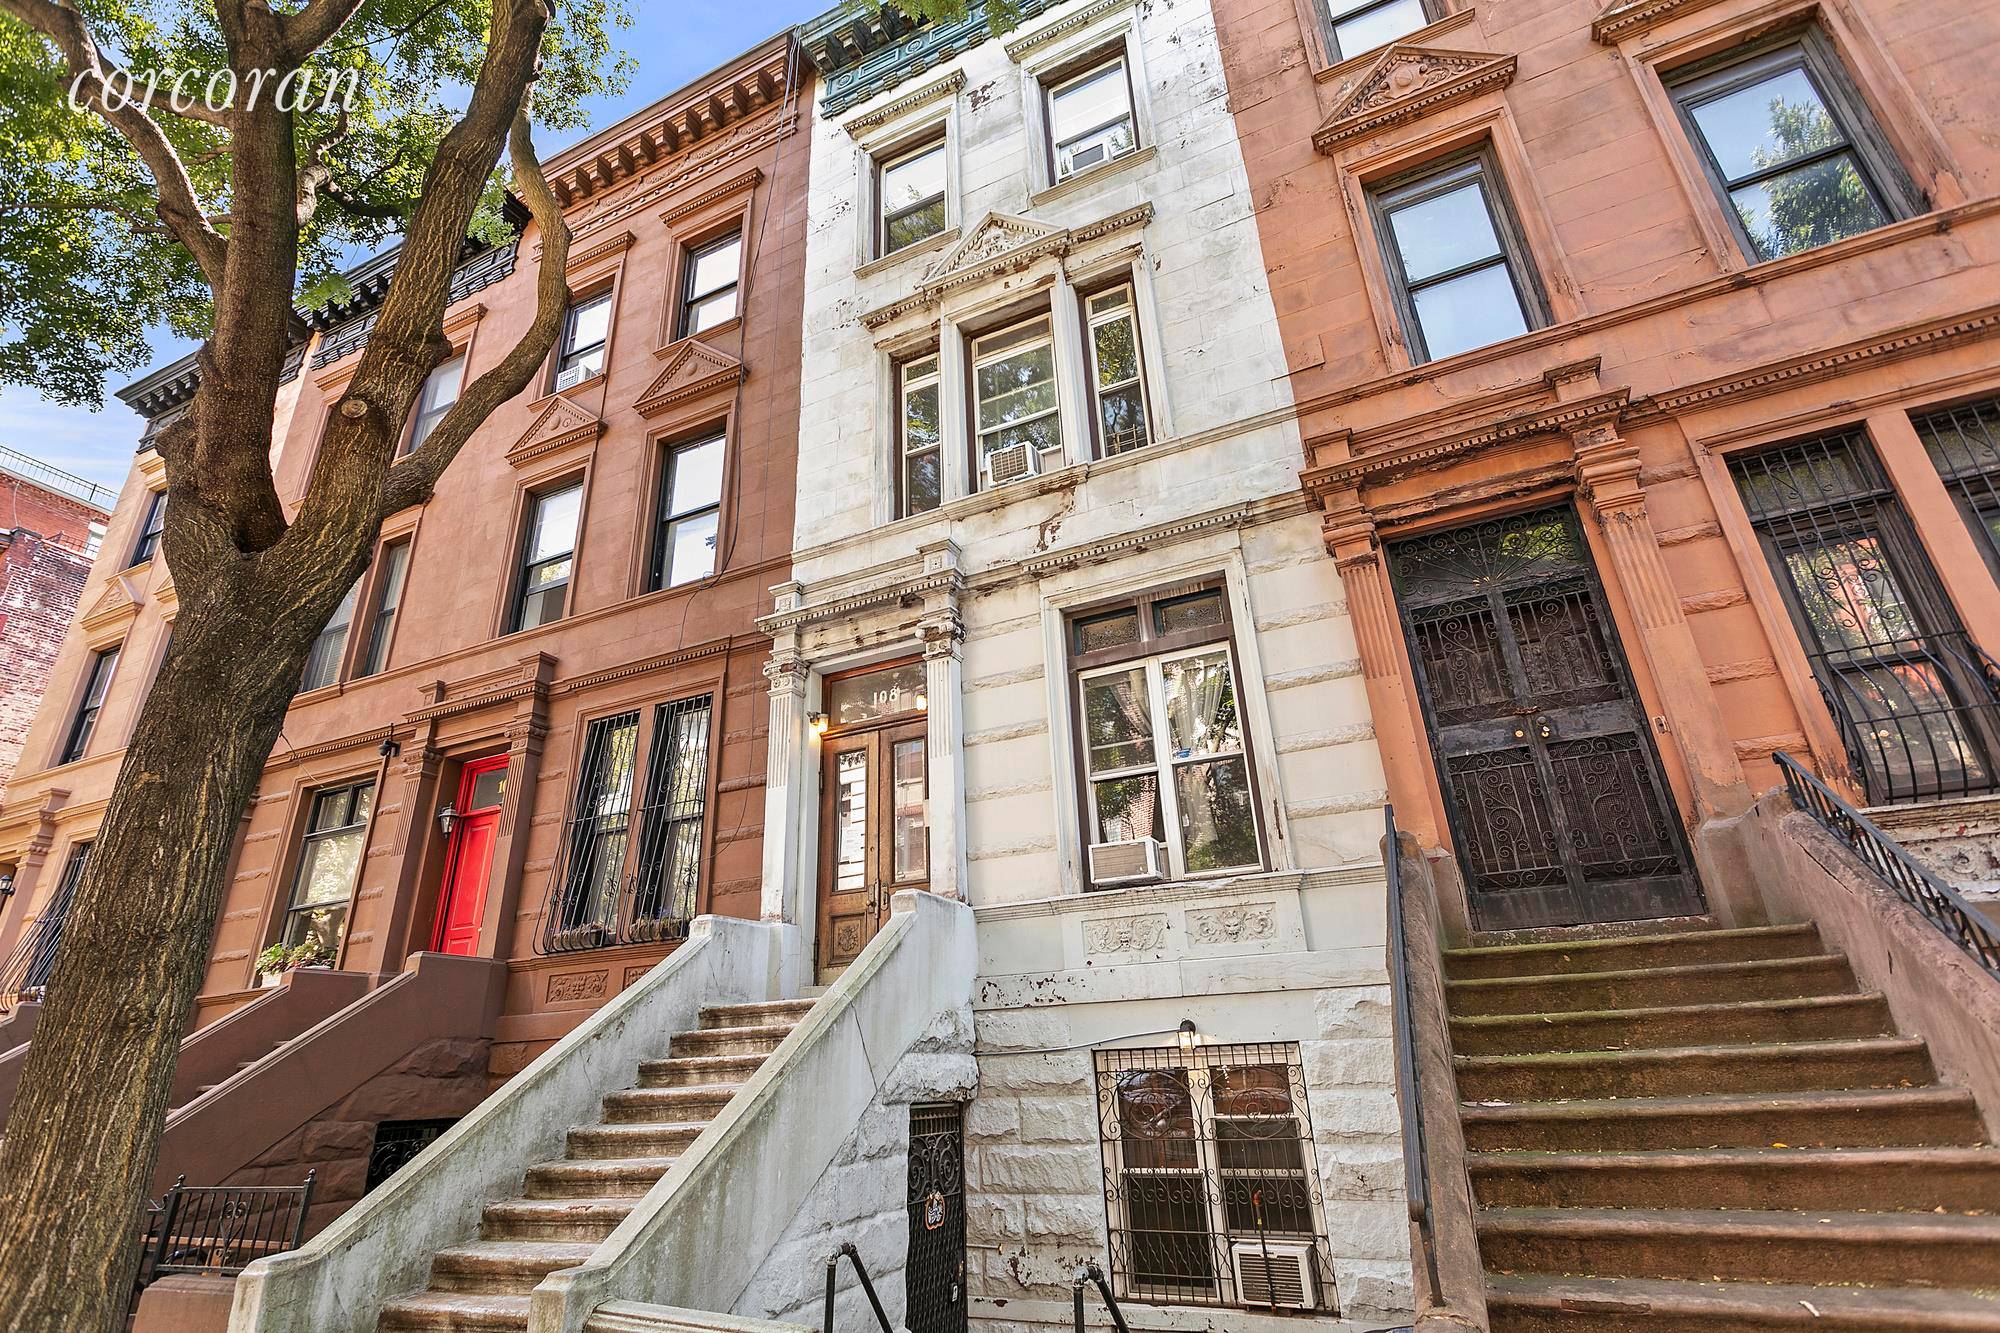 Accepted offer. A chance to own on West 120th in the Mt Morris Park Historic District, just blocks away from Mt Morris and Central Park.